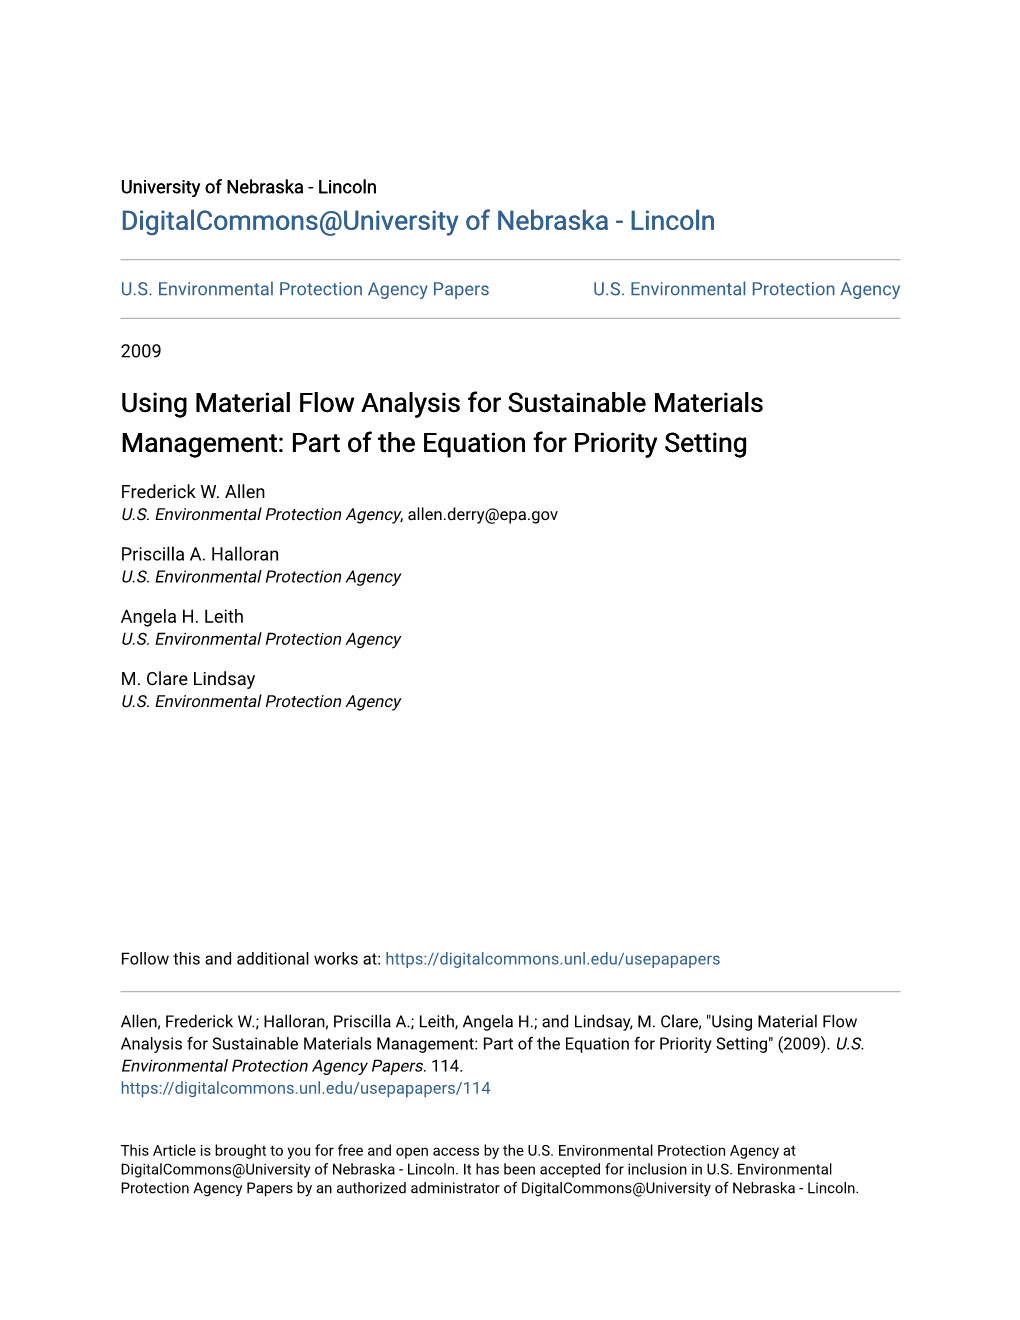 Using Material Flow Analysis for Sustainable Materials Management: Part of the Equation for Priority Setting